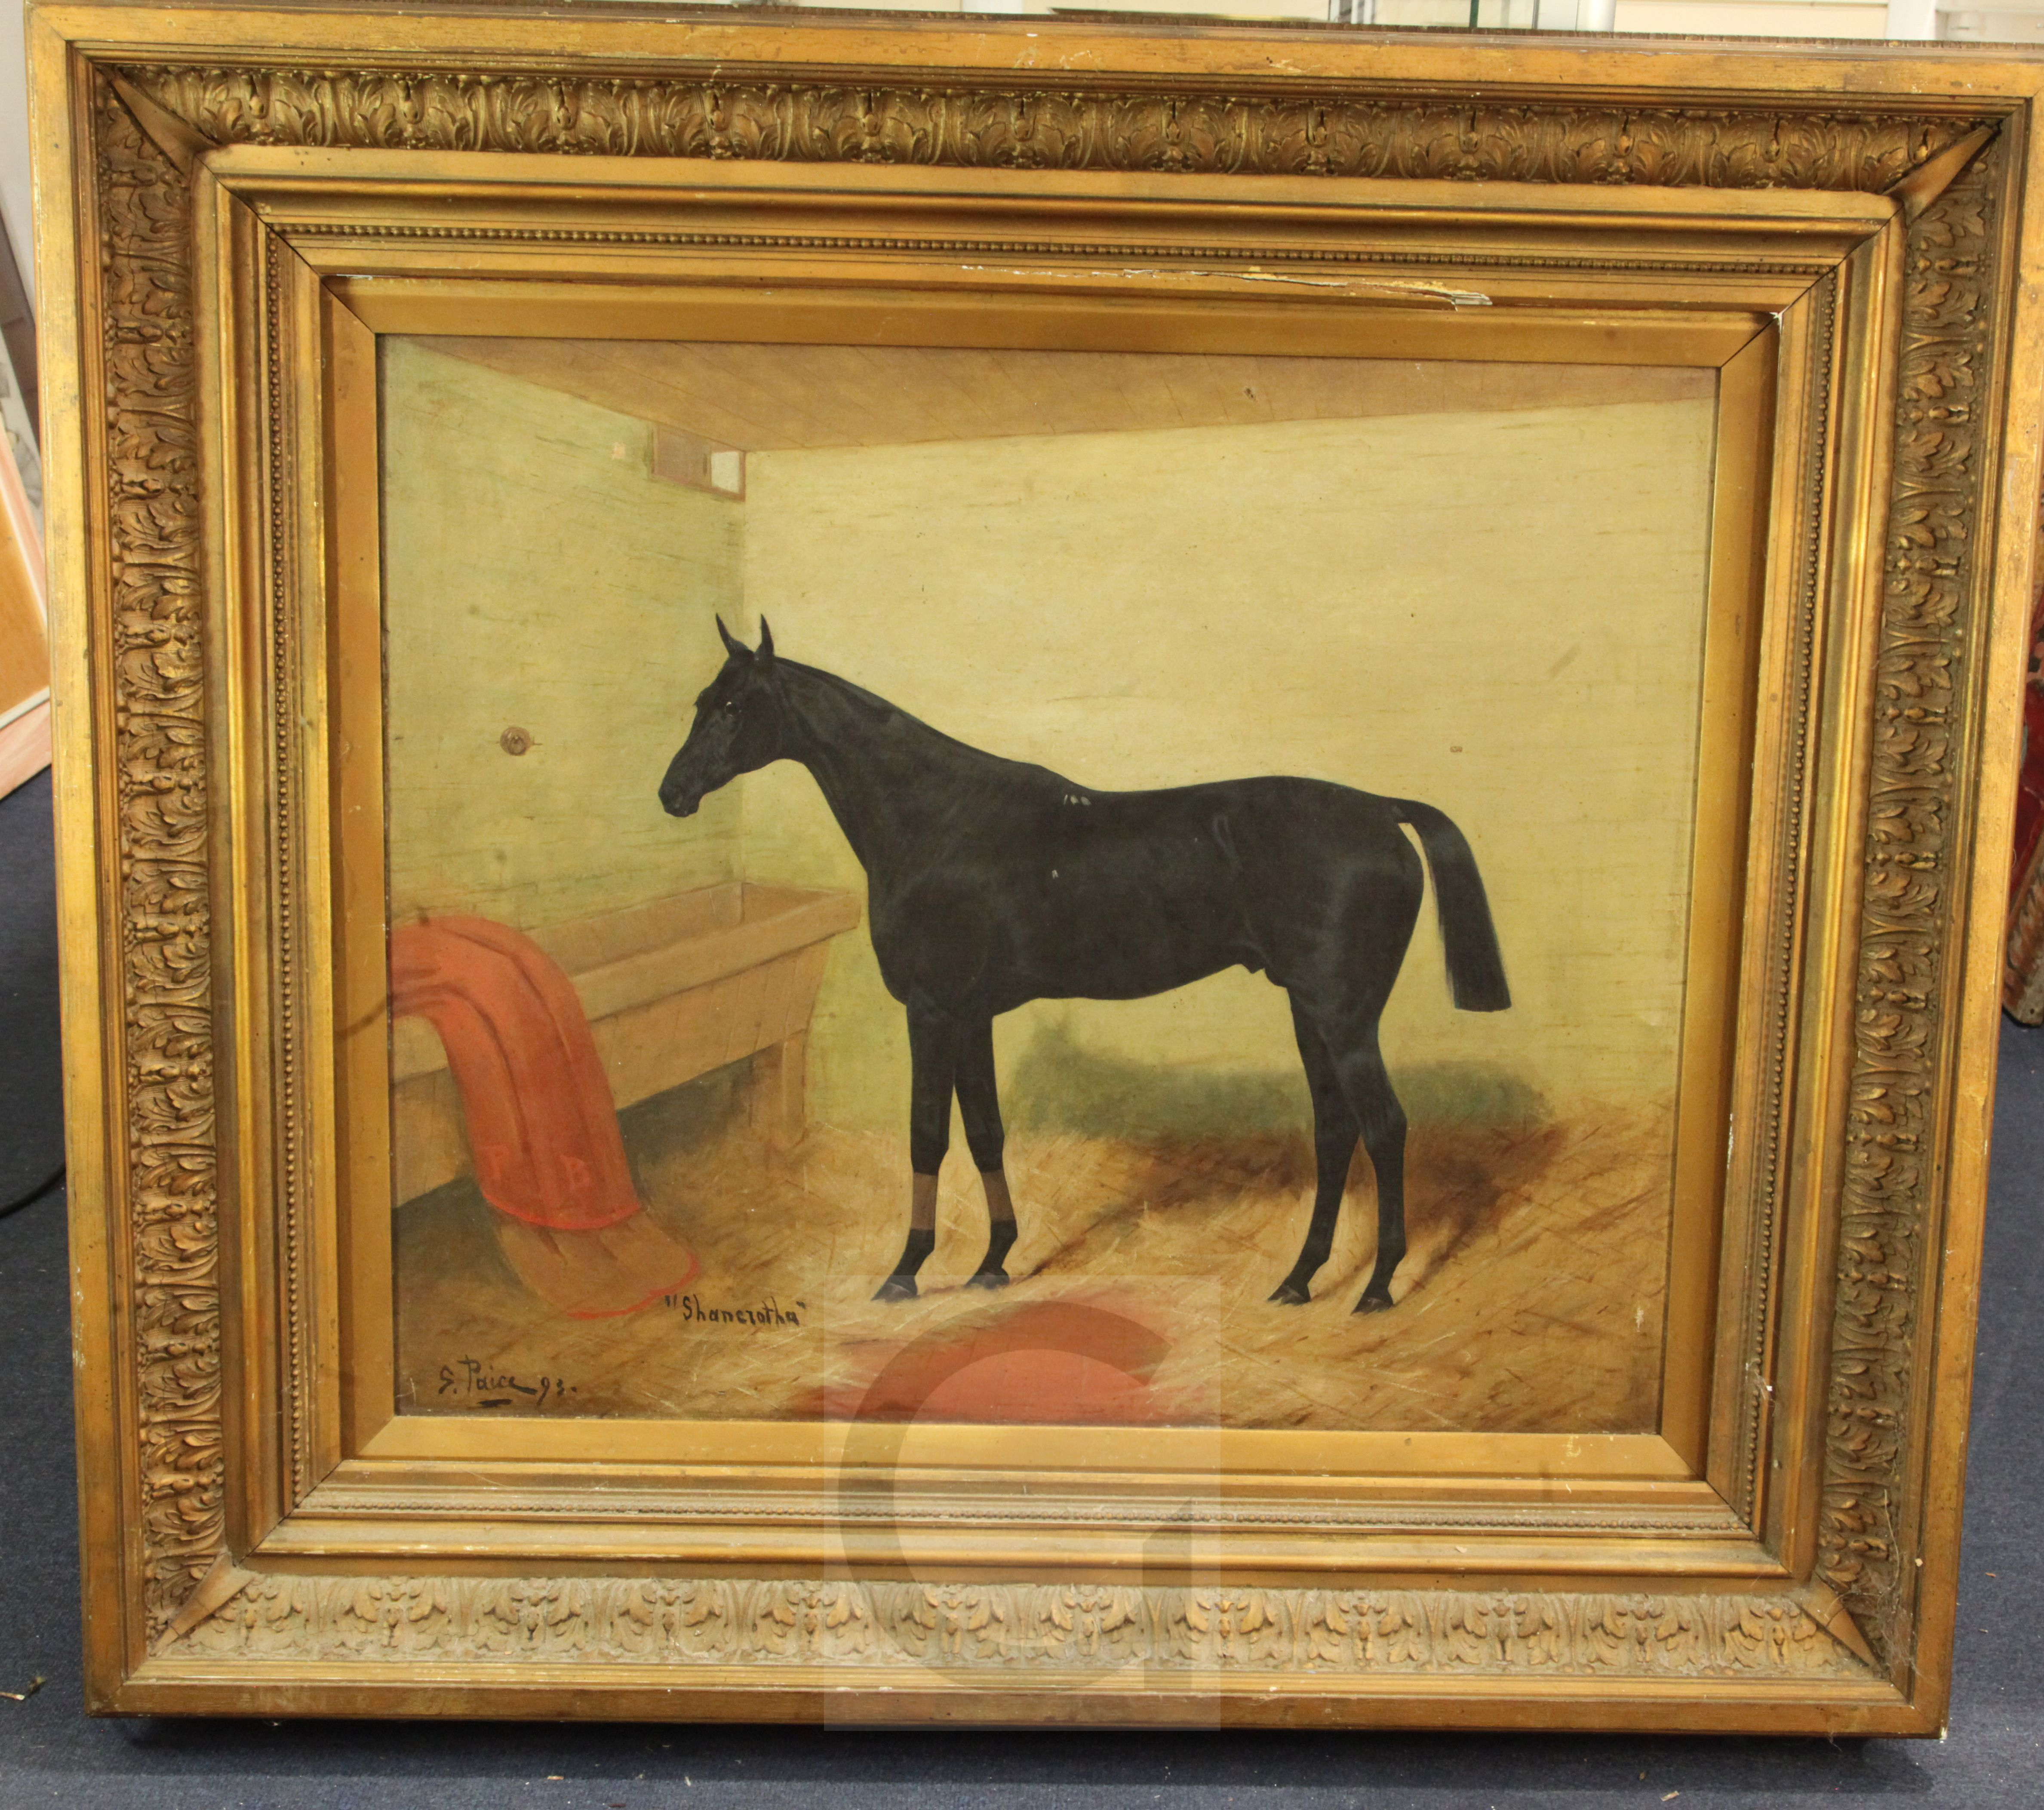 George Paice (1854-1925)oil on canvasShancrotha - Winner of The Manchester Cupsigned and dated '93 - Image 2 of 3